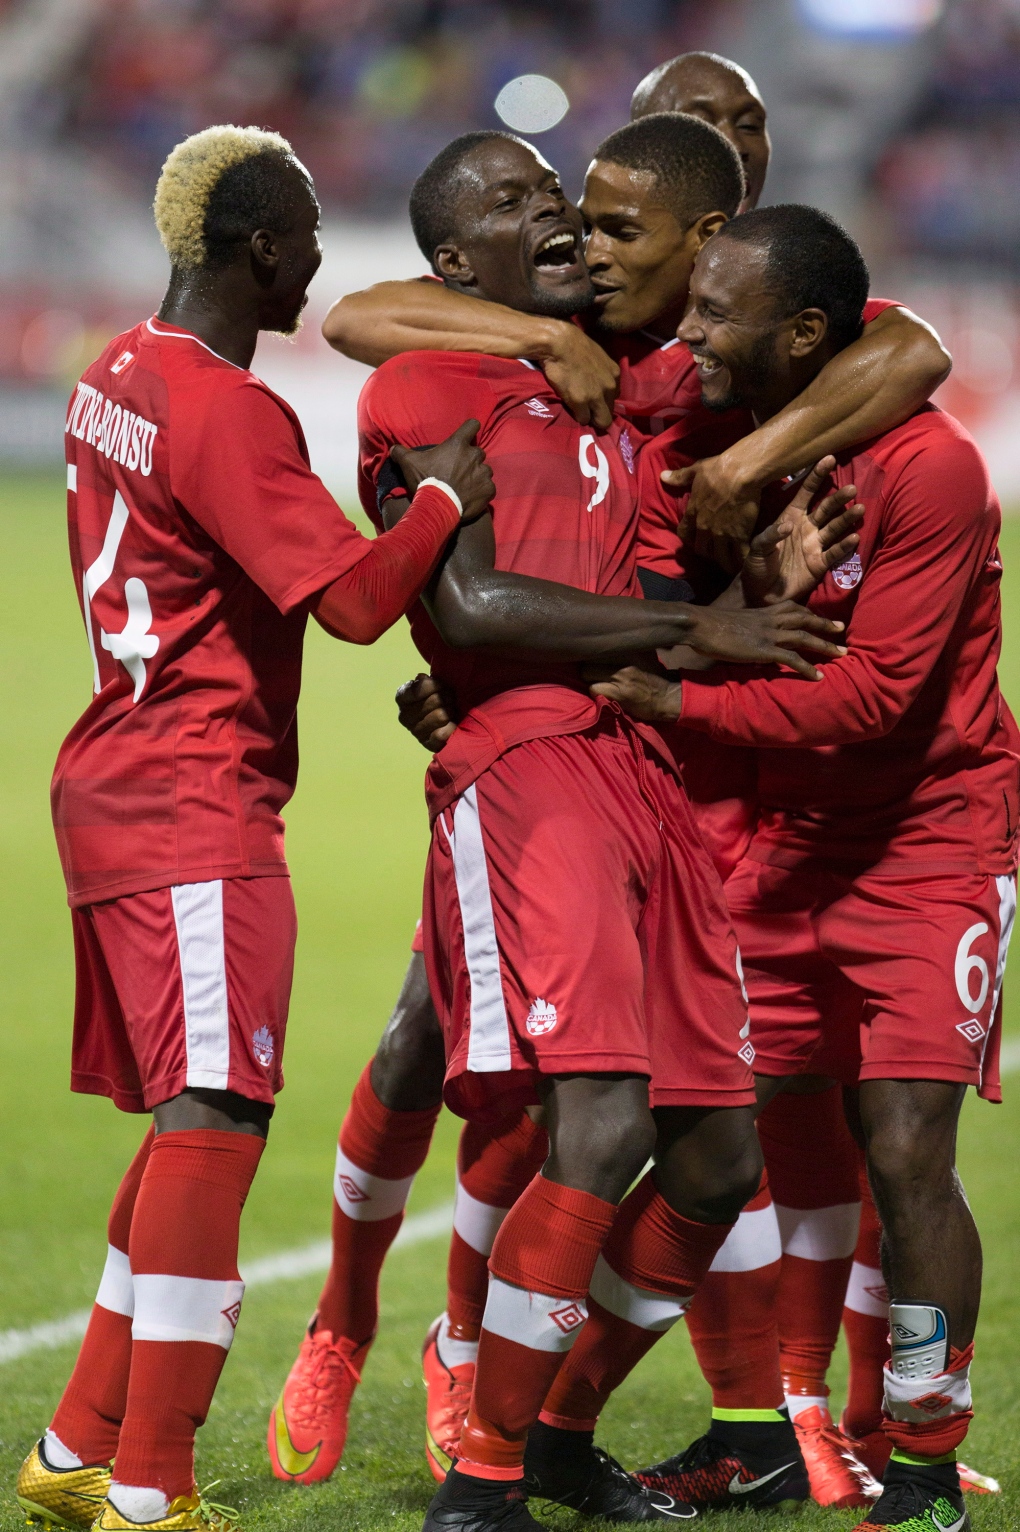 Team Canada aims to qualify for U-20 World Cup